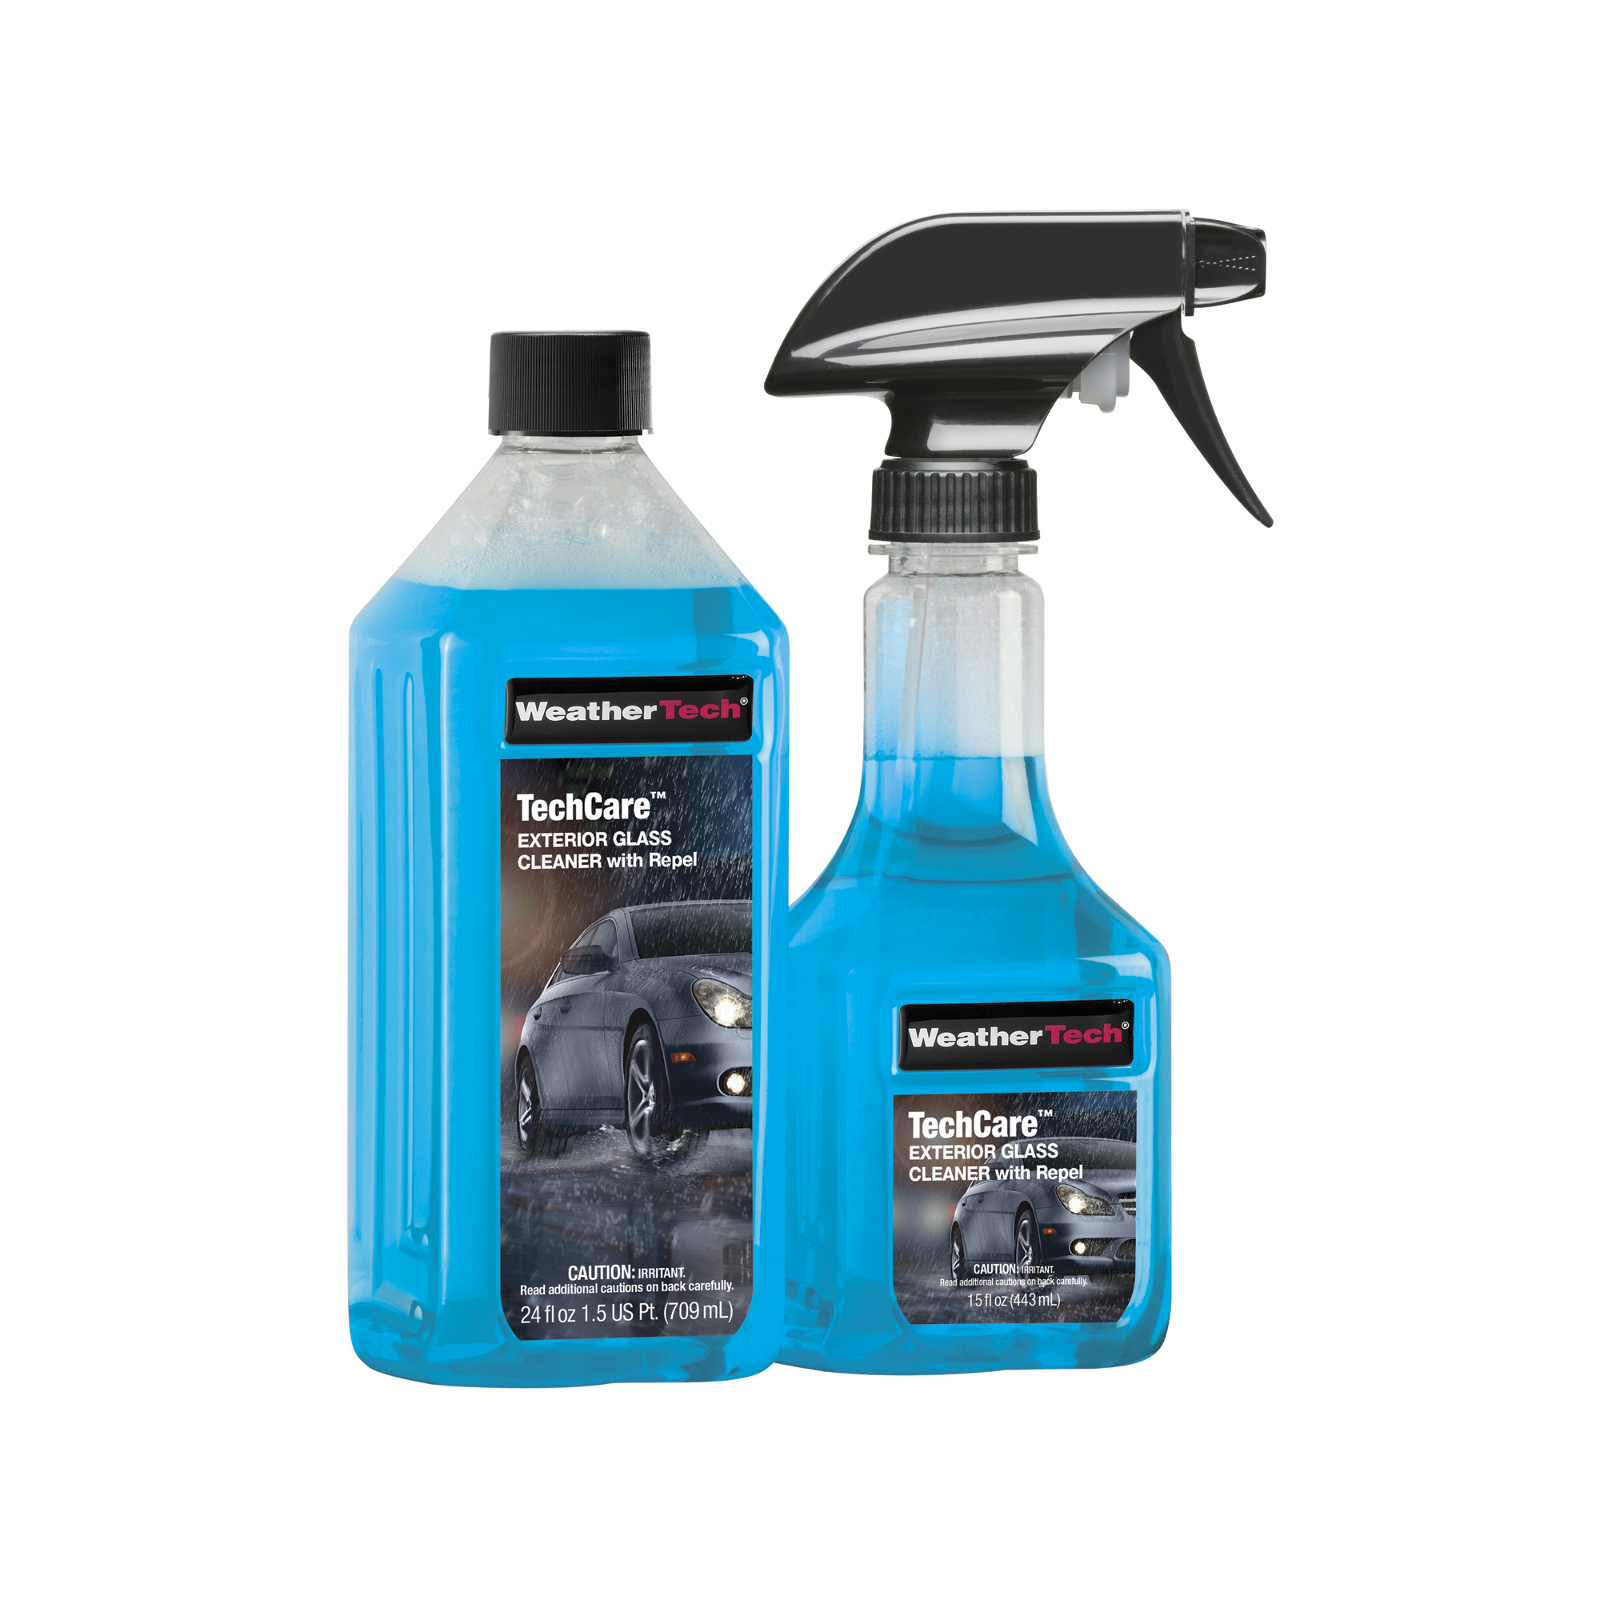 TechCare Exterior Glass Cleaner W/Repel Kit